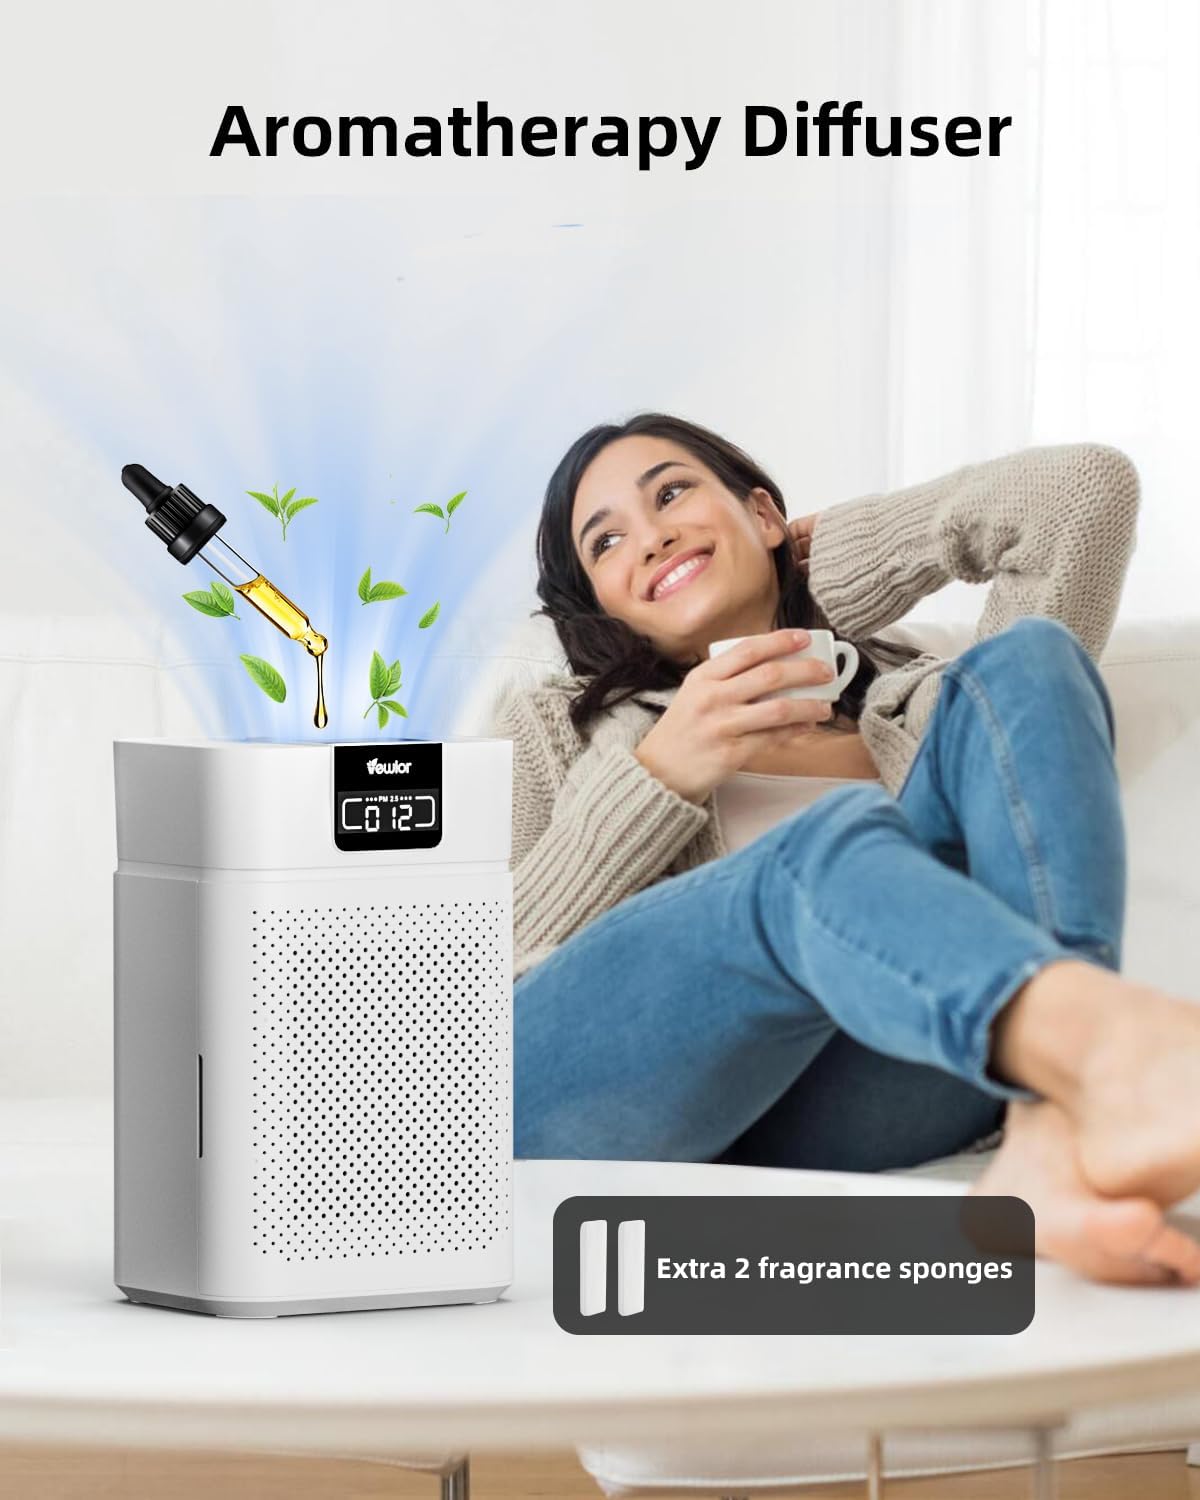 Air Purifiers, Home Air purifier for Large Room Bedroom Up to 1560ft², VEWIOR H13 True HEPA Air Filter for Wildfire Smoke Pets Pollen Odor, with Air Quality Monitoring Light, Auto/Sleep Mode, 6 Timer Vewior